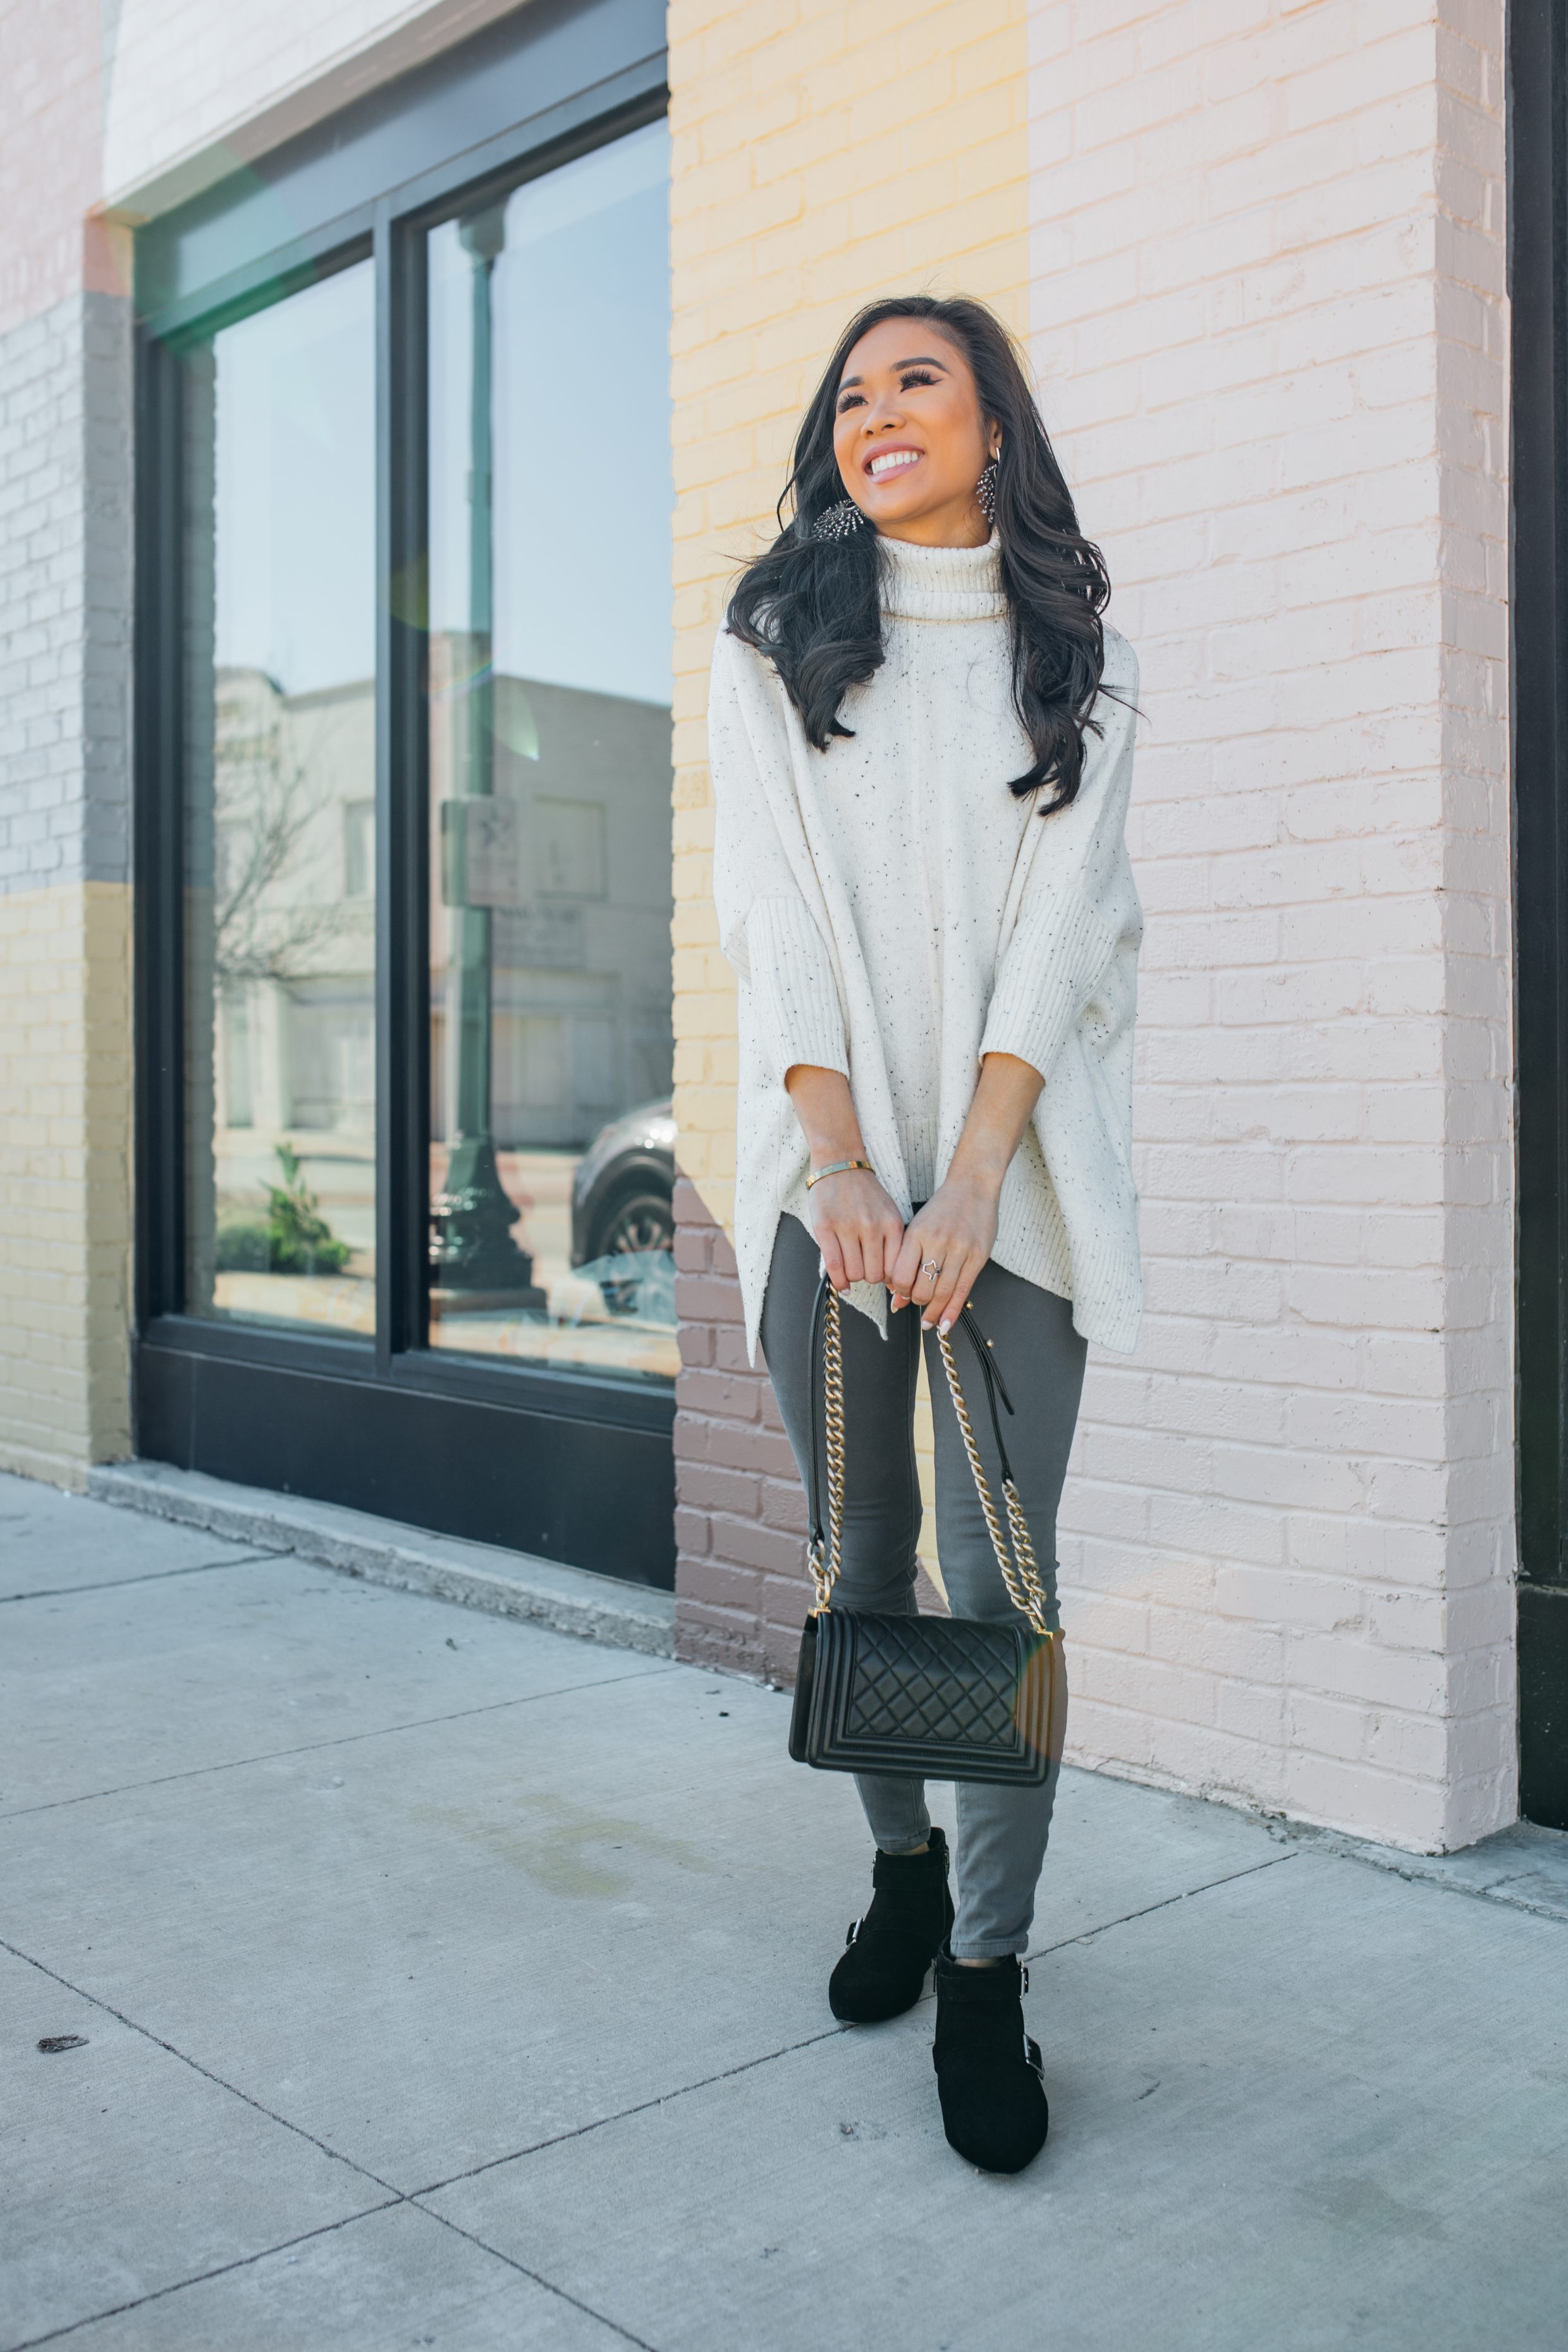 Blogger Hoang-Kim shares a casual winter outfit